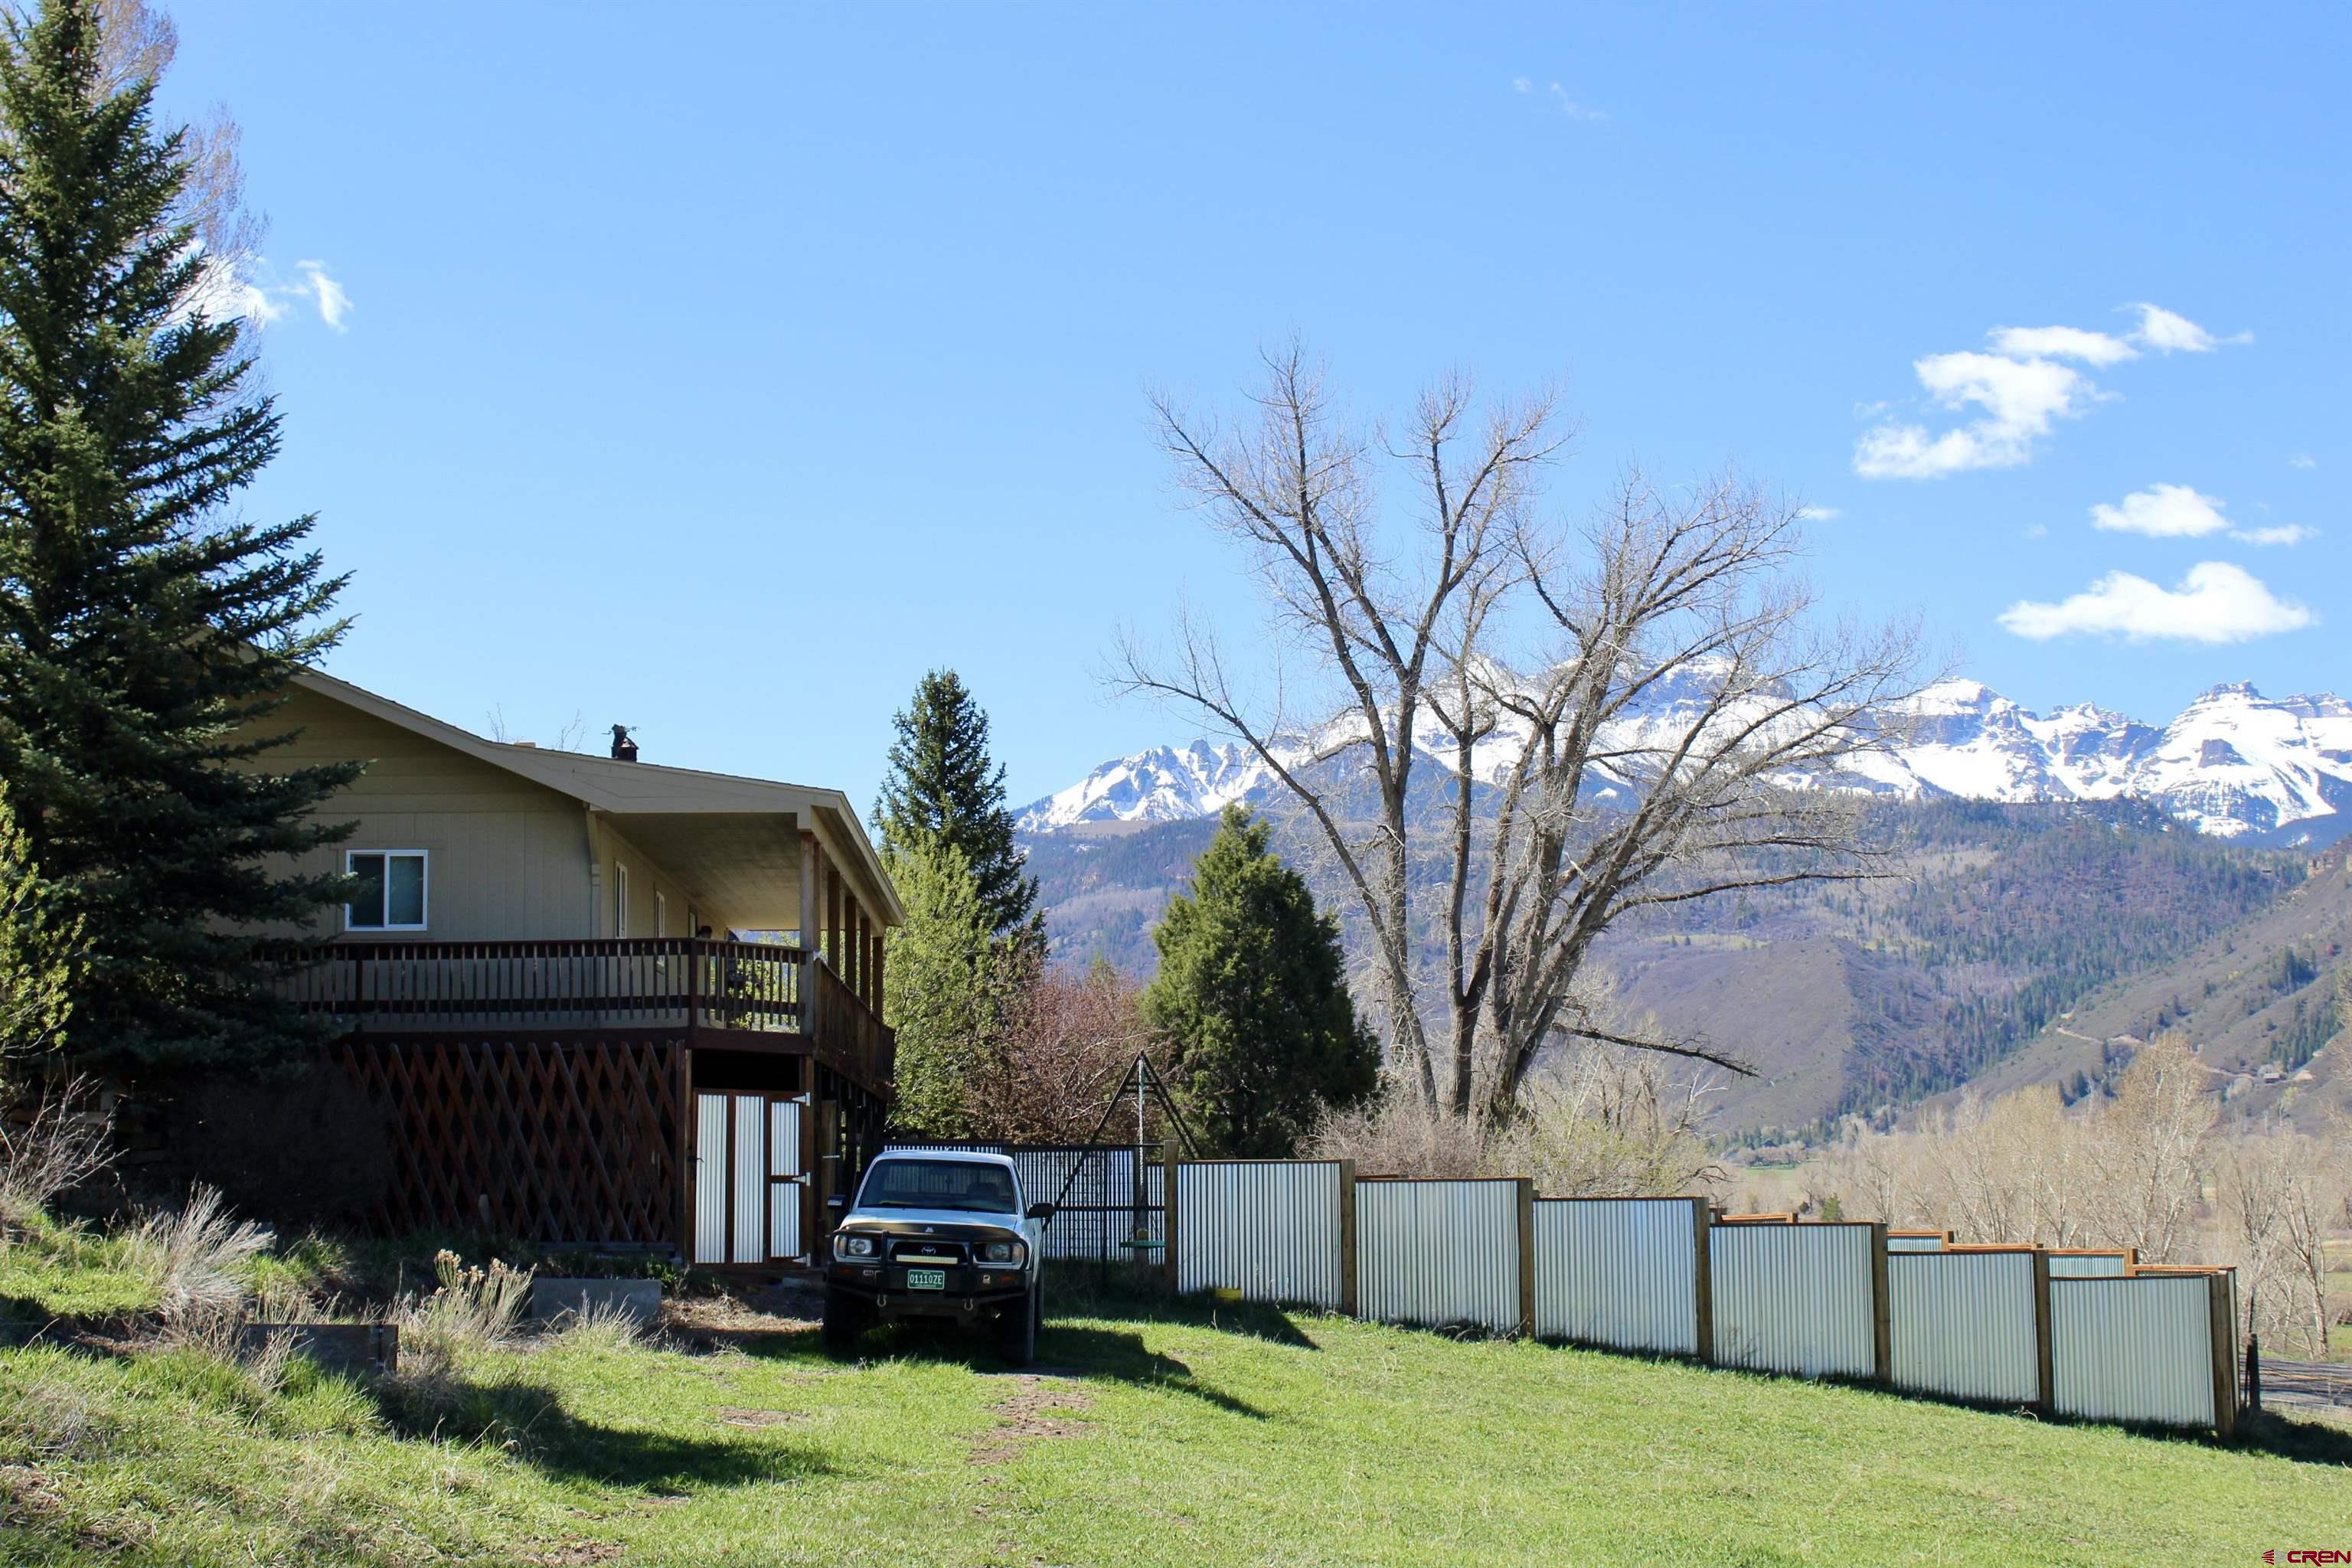 LOCATION! LOCATION! LOCATION! MOUNTAIN VIEWS AT THEIR BEST!  Here is your chance to get a one-of-a-kind property close to Ouray and Ridgway with everything you need.  Located just off 550 and across from Orvis Hot Springs, this 1.85 acres is complete with a 3 bedroom/2 bath home, partially completed basement which already has a heat source, detached 3 bay garages with a shop, and a gorgeous, enclosed gazebo with electricity overlooking the Sneffels range. The gazebo could be used as a reading room, observation area, hot tub room, art room or more. The basement can be a 4th bedroom, office, work out area, or anything you dream up. There is also a privacy fenced backyard for your 4-legged friends, children to play, or to enjoy yourself.  With the home sitting up above the highway, the deck has spectacular views of the mountains.  The property has 2 access points and has room for all your toys and a roomy shop for your projects.   Come see all the possibilities.  Empty and easy to show!